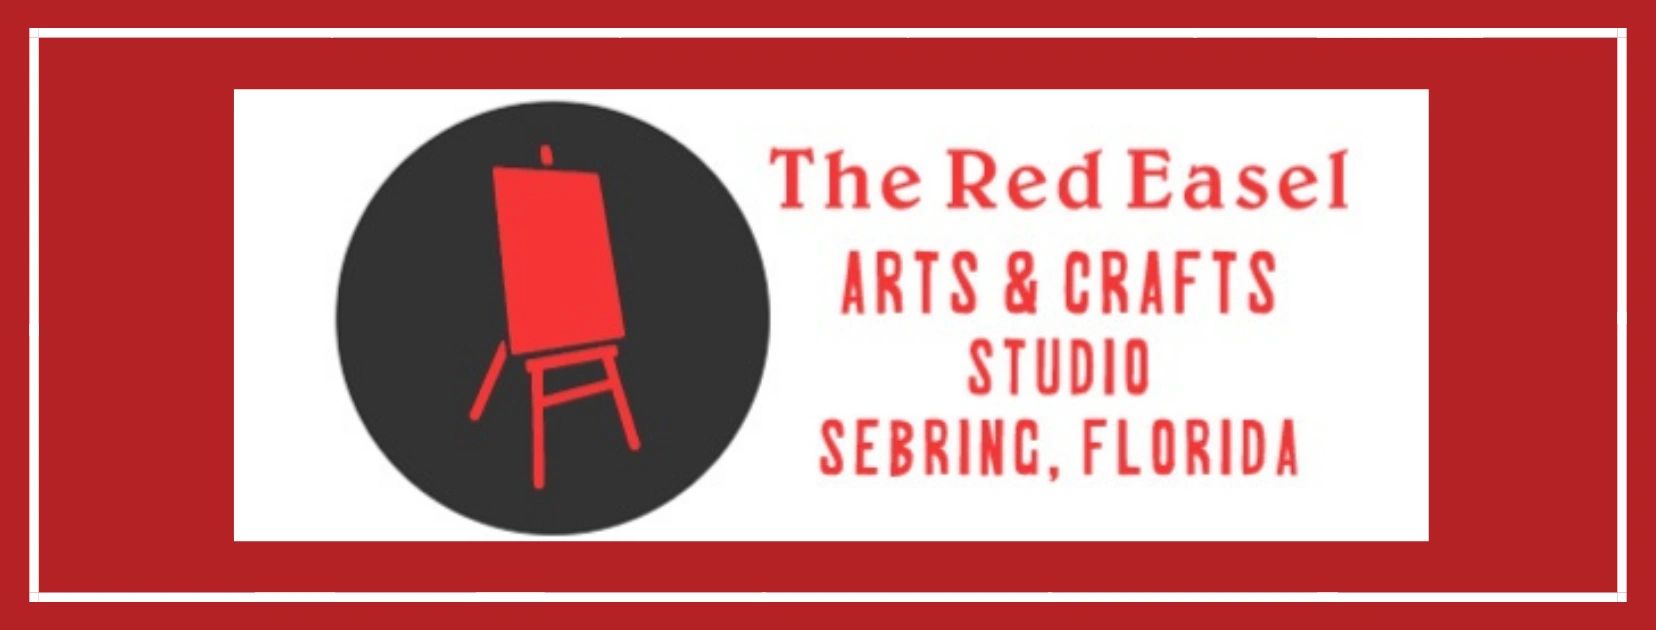 The Red Easel Arts and Crafts Studio logo 